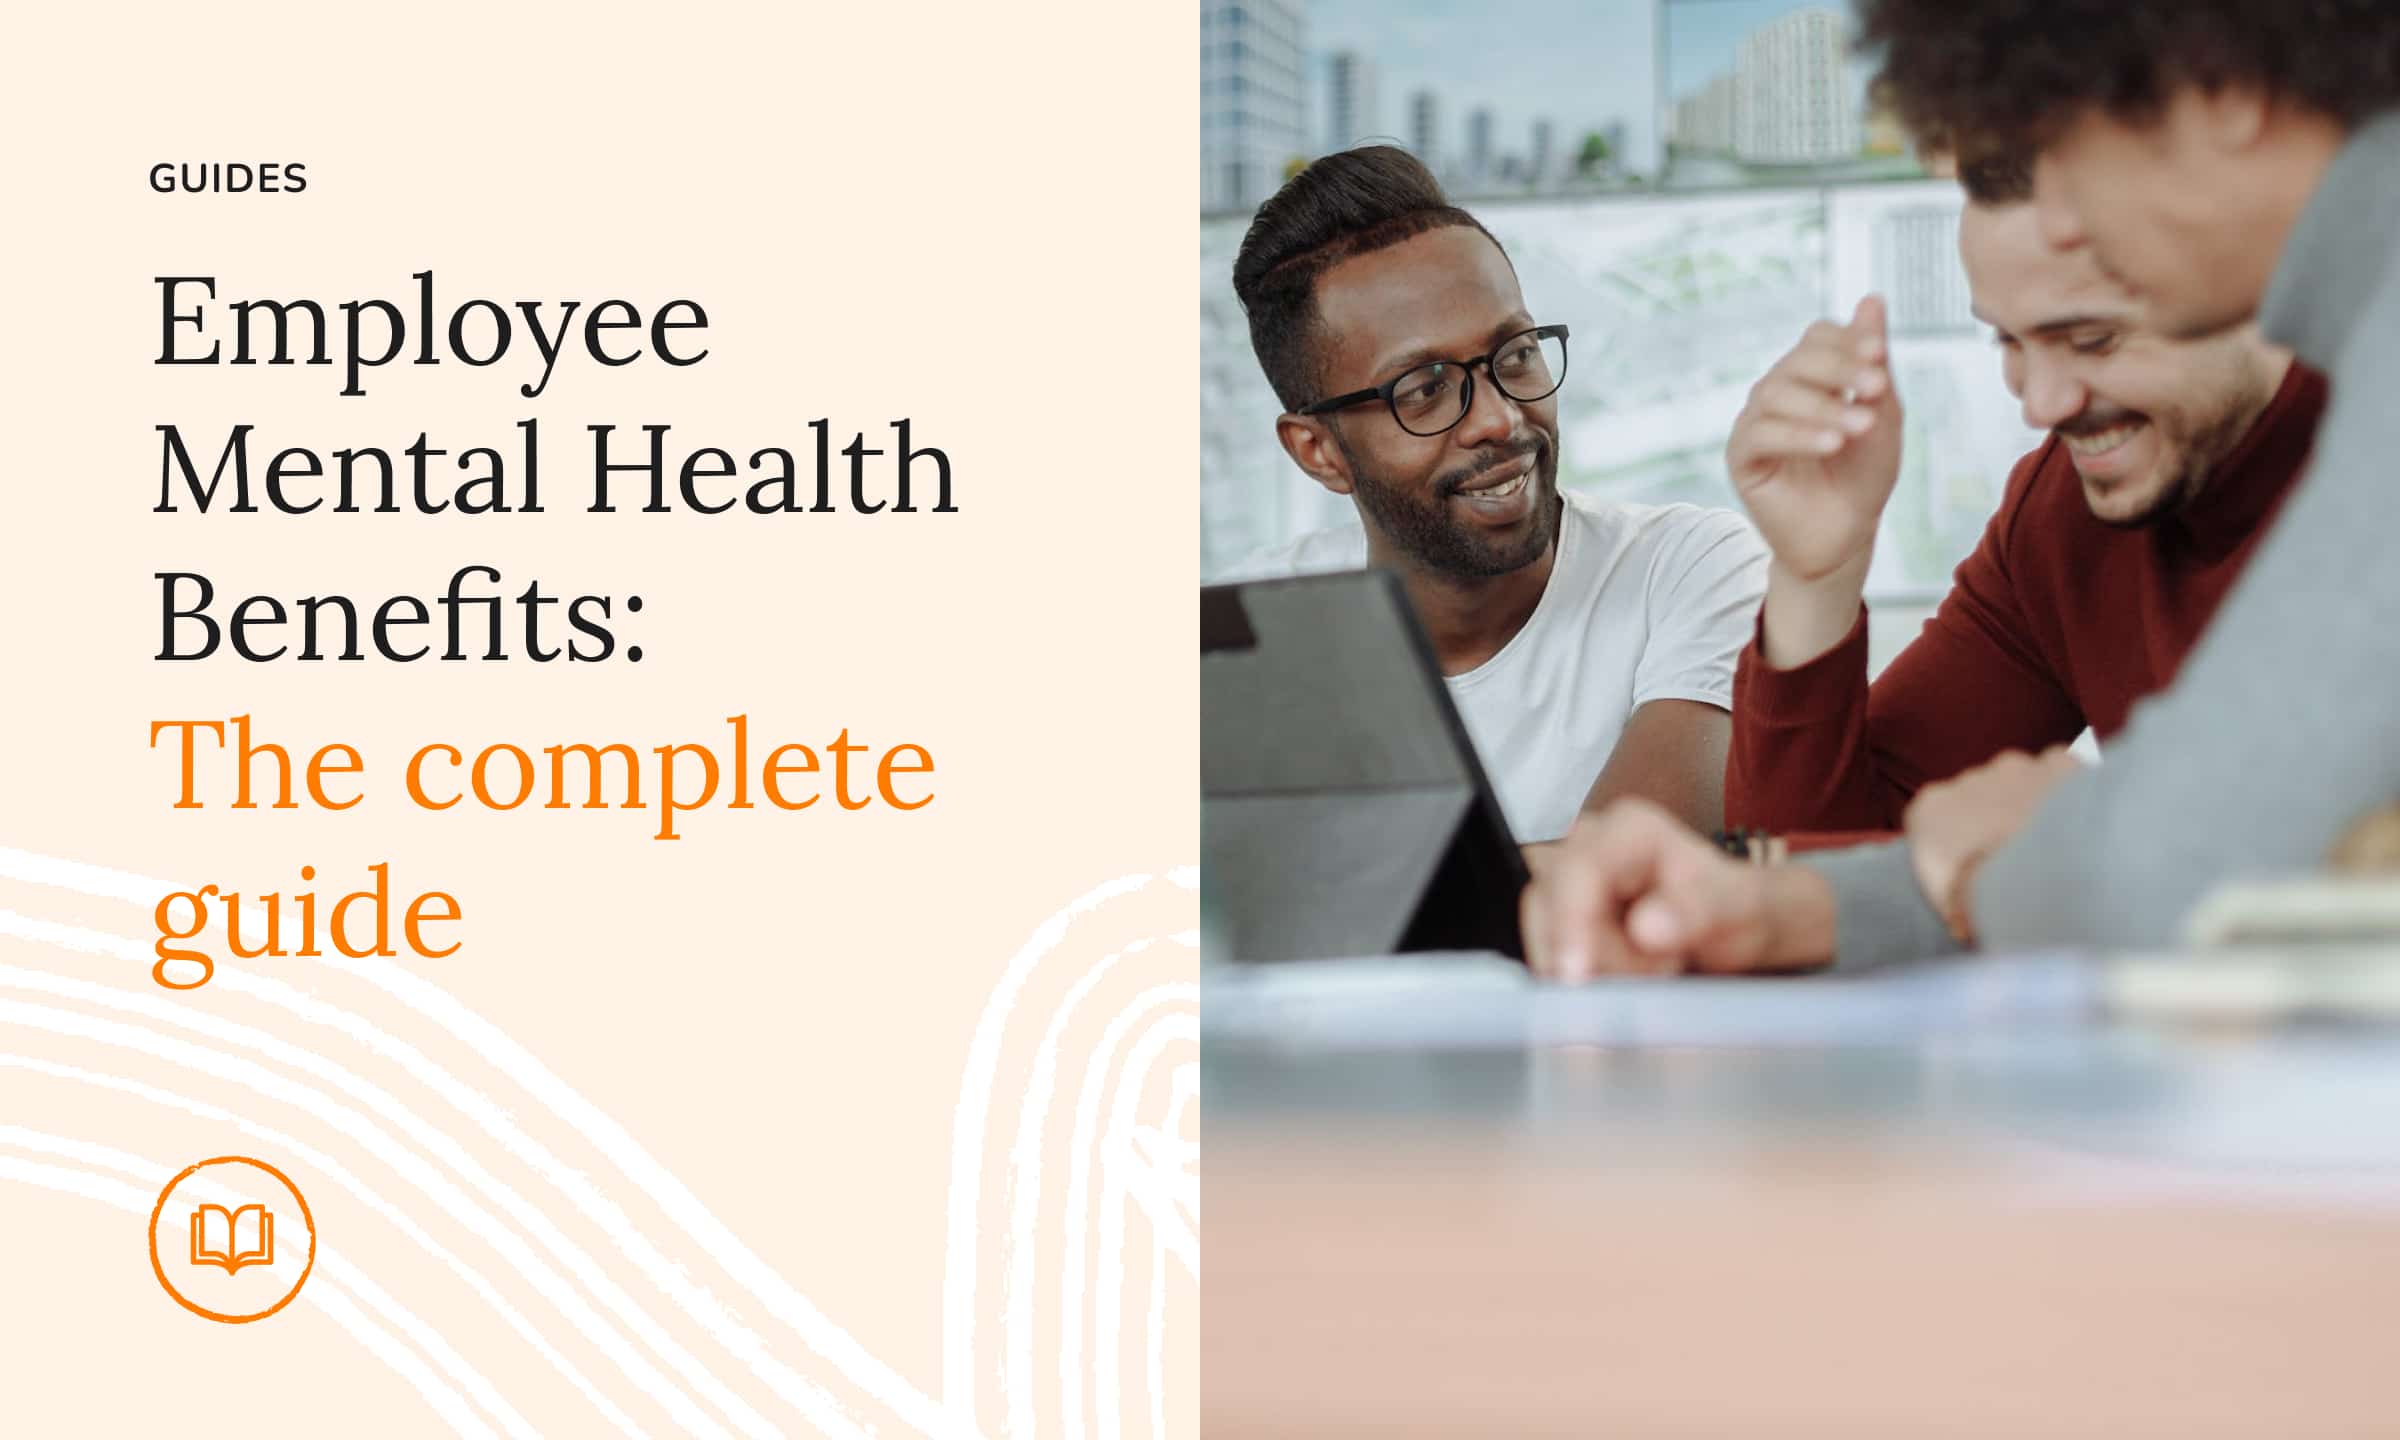 Employee Mental Health Benefits: The complete guide